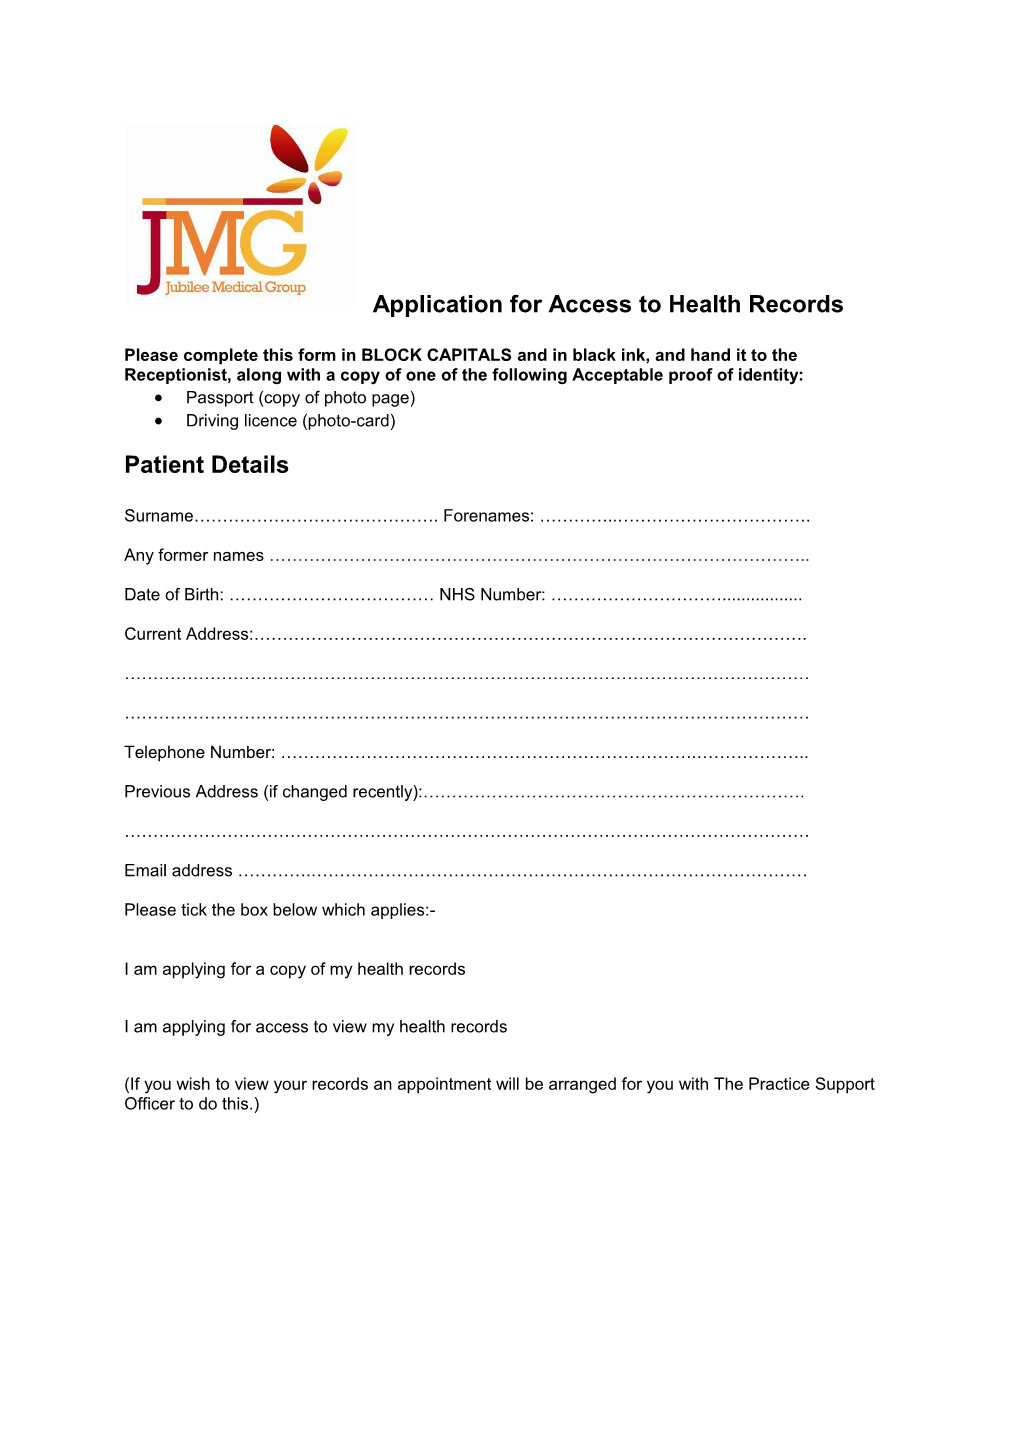 Application for Access to Health Records